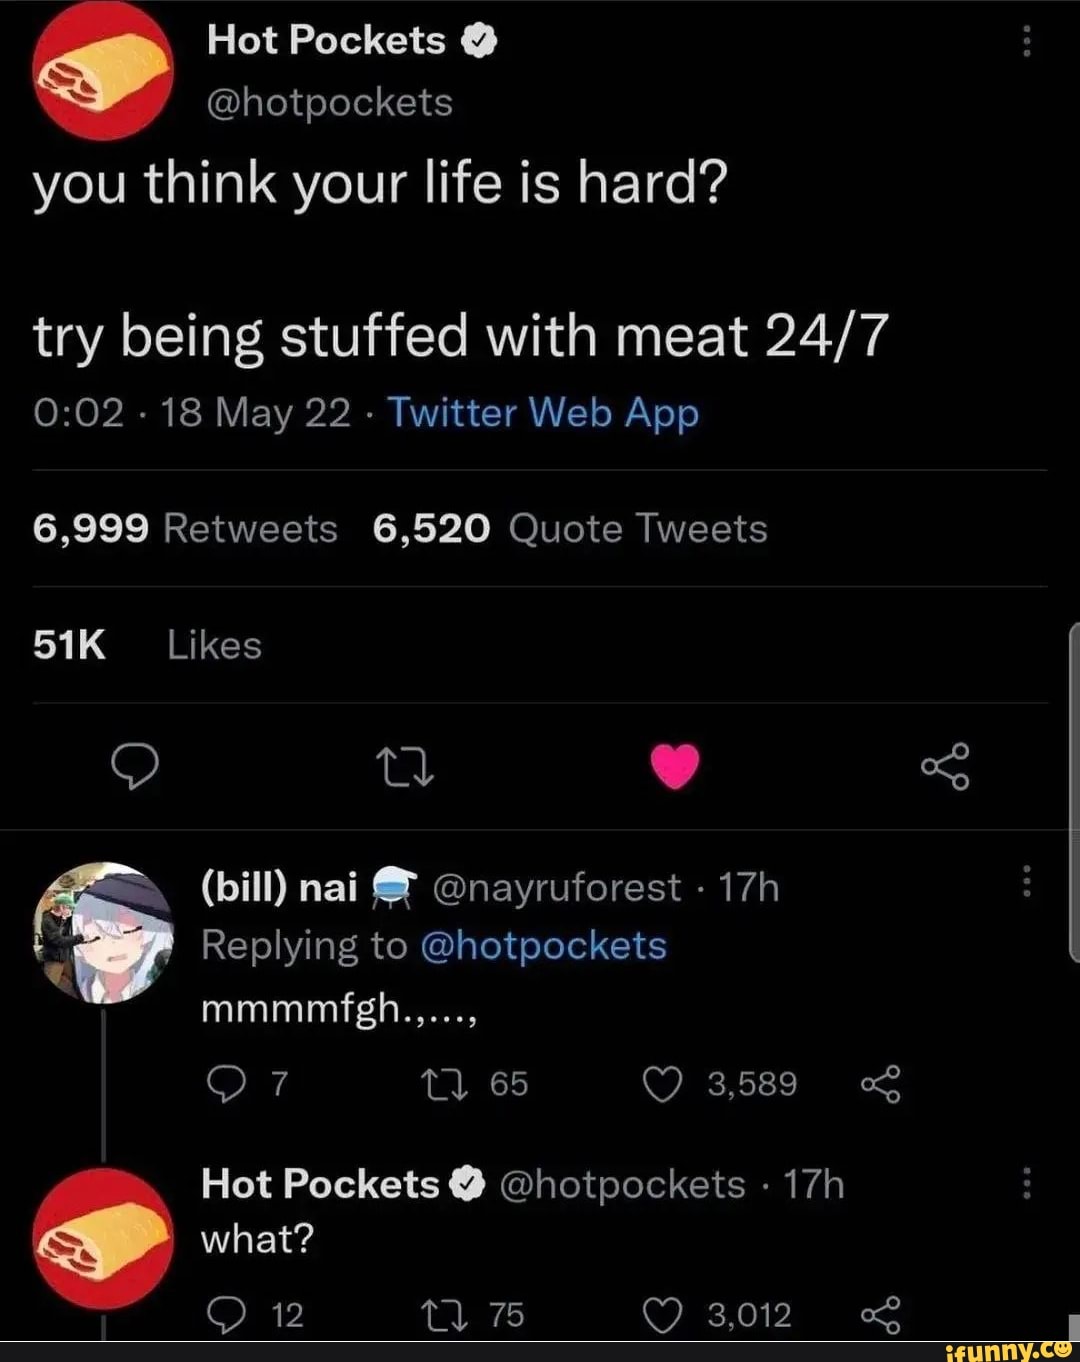 Hot Pockets Ss Hotpockets You Think Your Life Is Hard Try Being Stuffed With Meat 6999